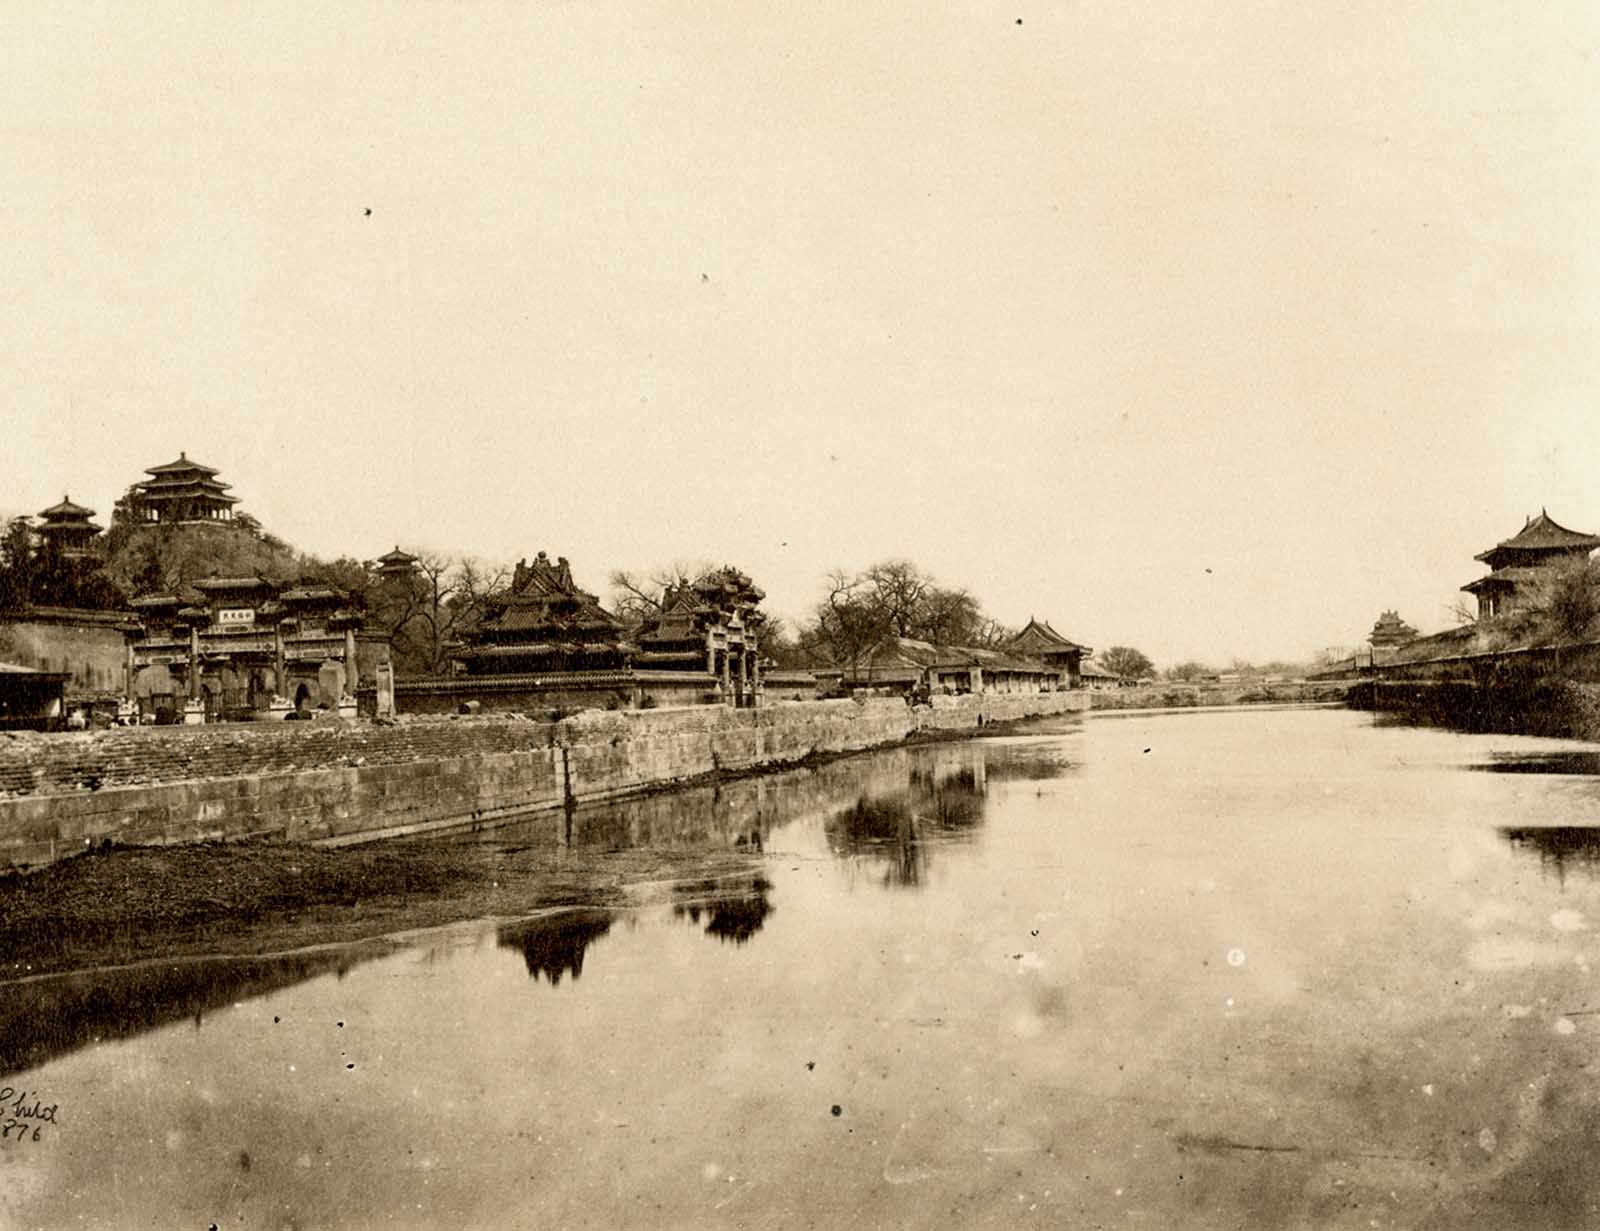 A view of the Forbidden City from across an imperial moat. This photograph shows 15th and 16th-century Chinese fortification systems which do not exist today.